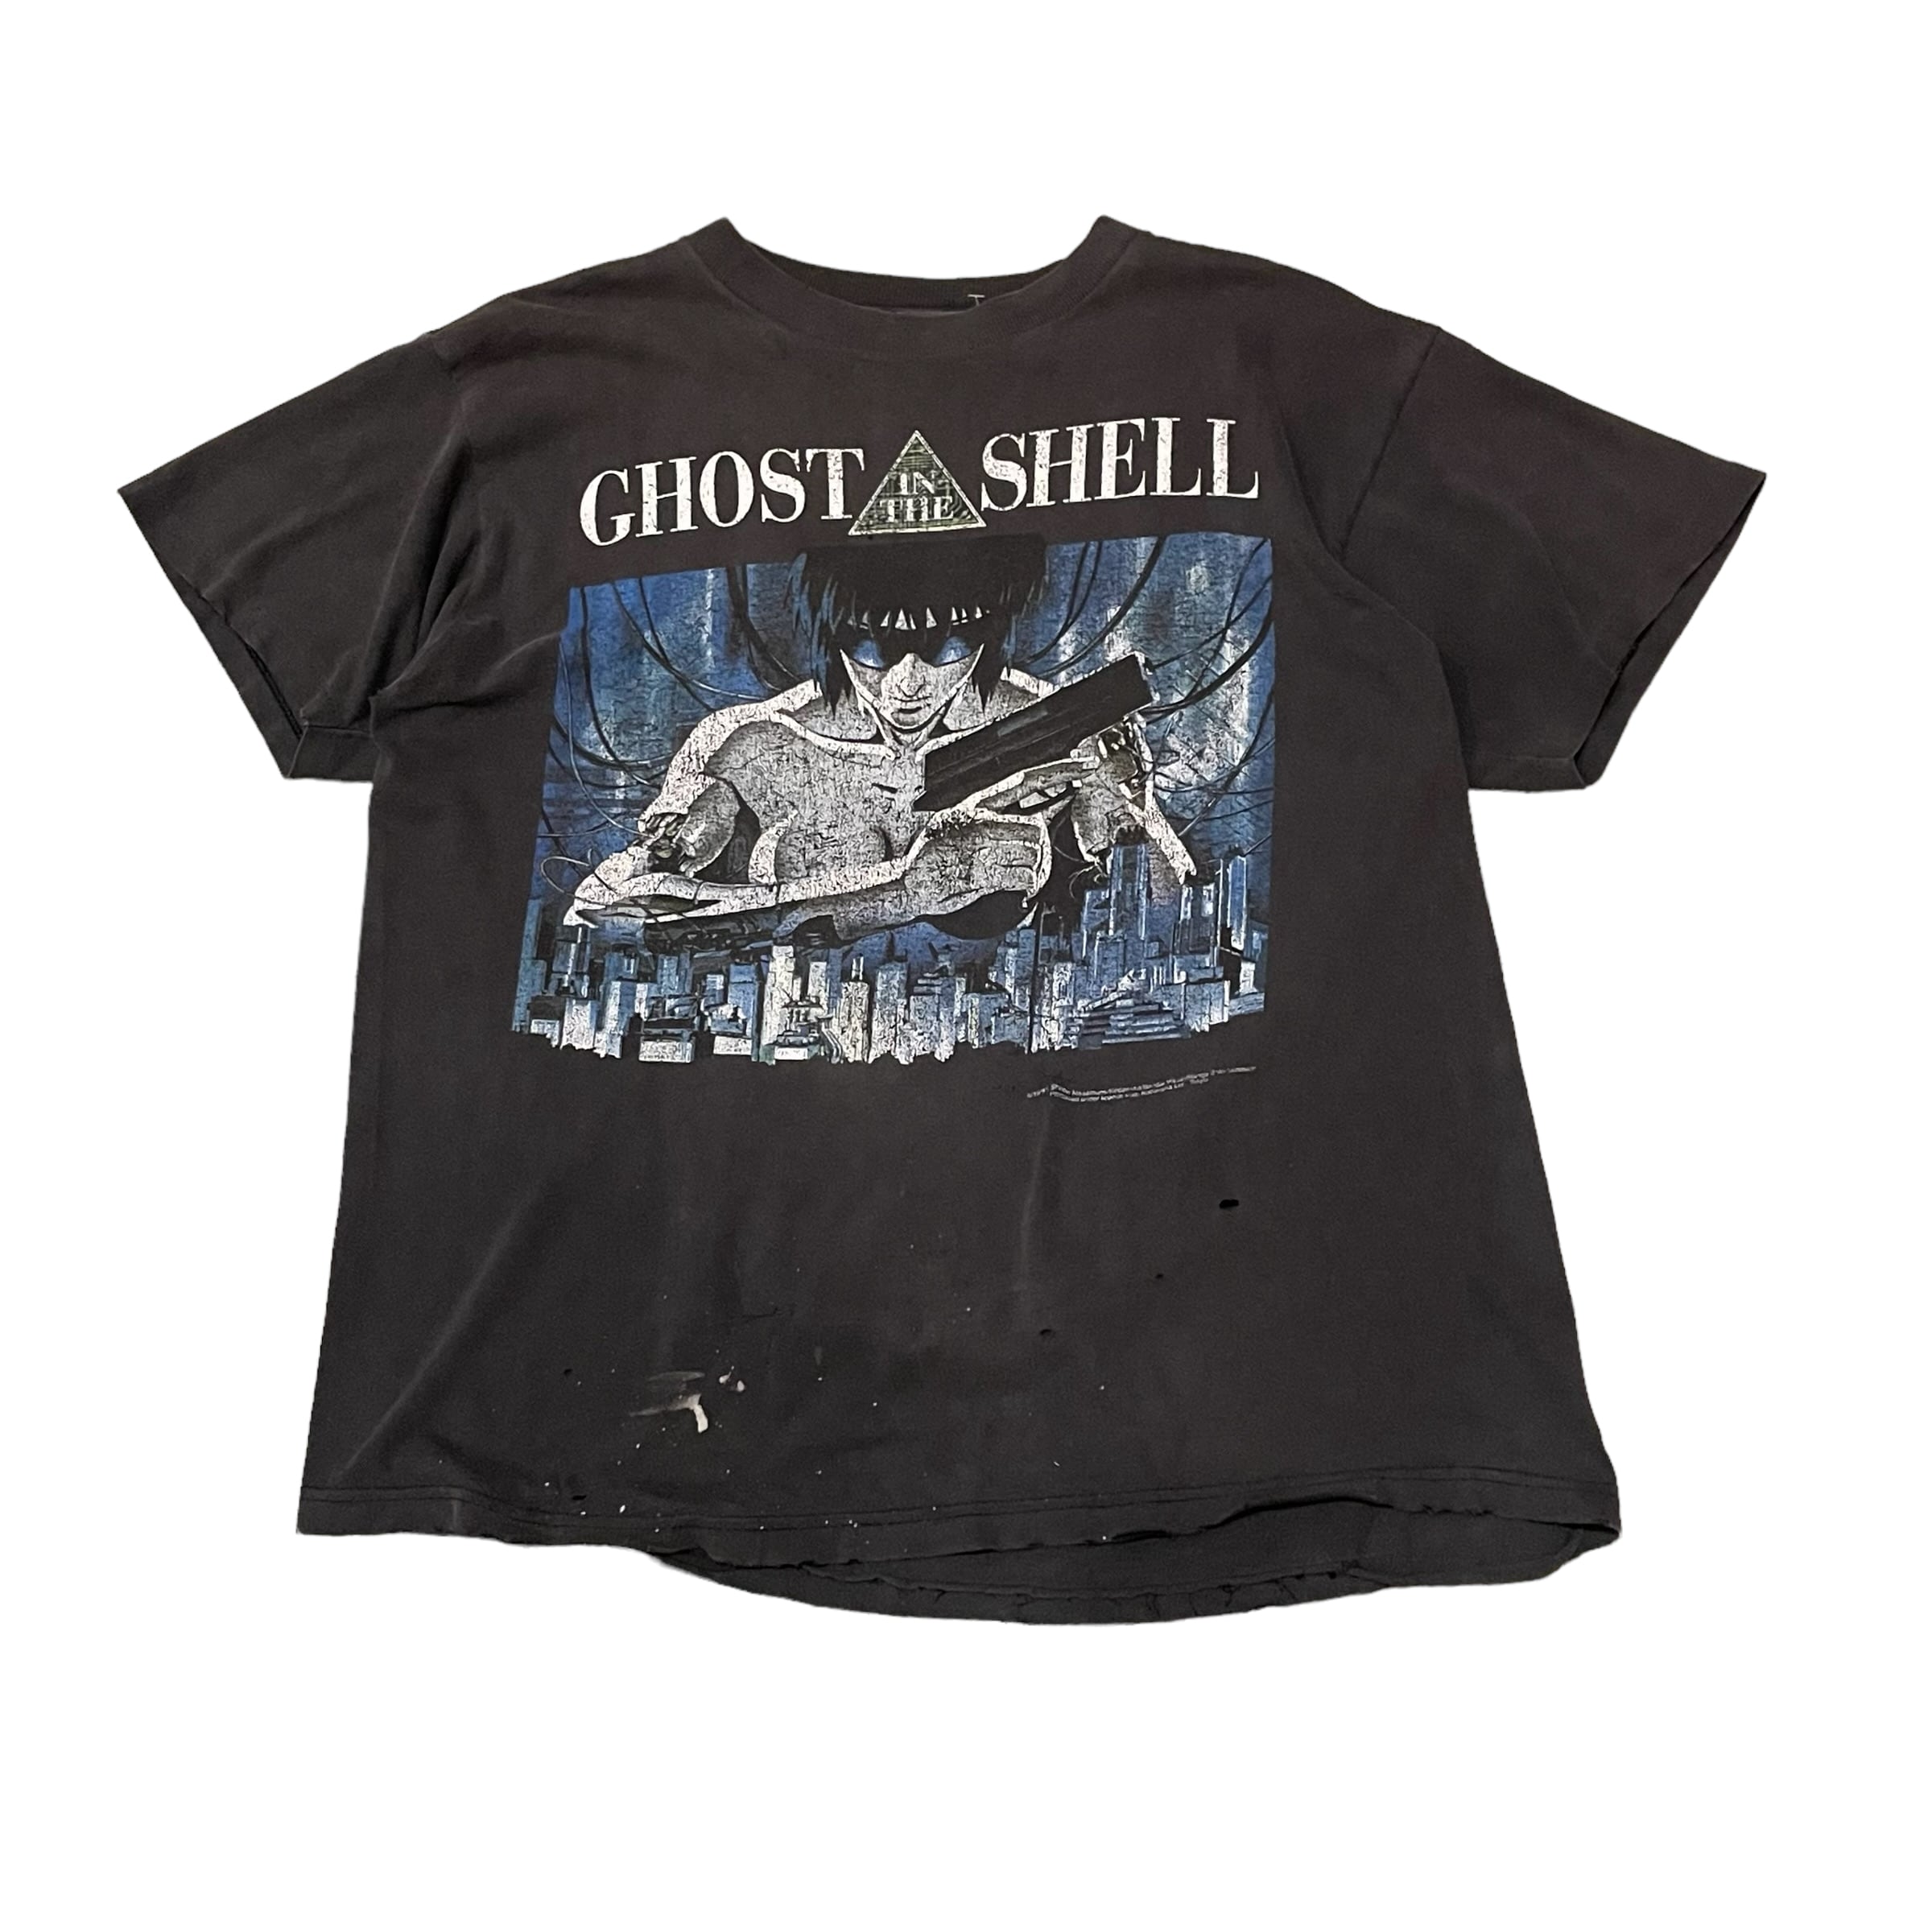 GHOST IN THE SHELL Tシャツ fashion victim